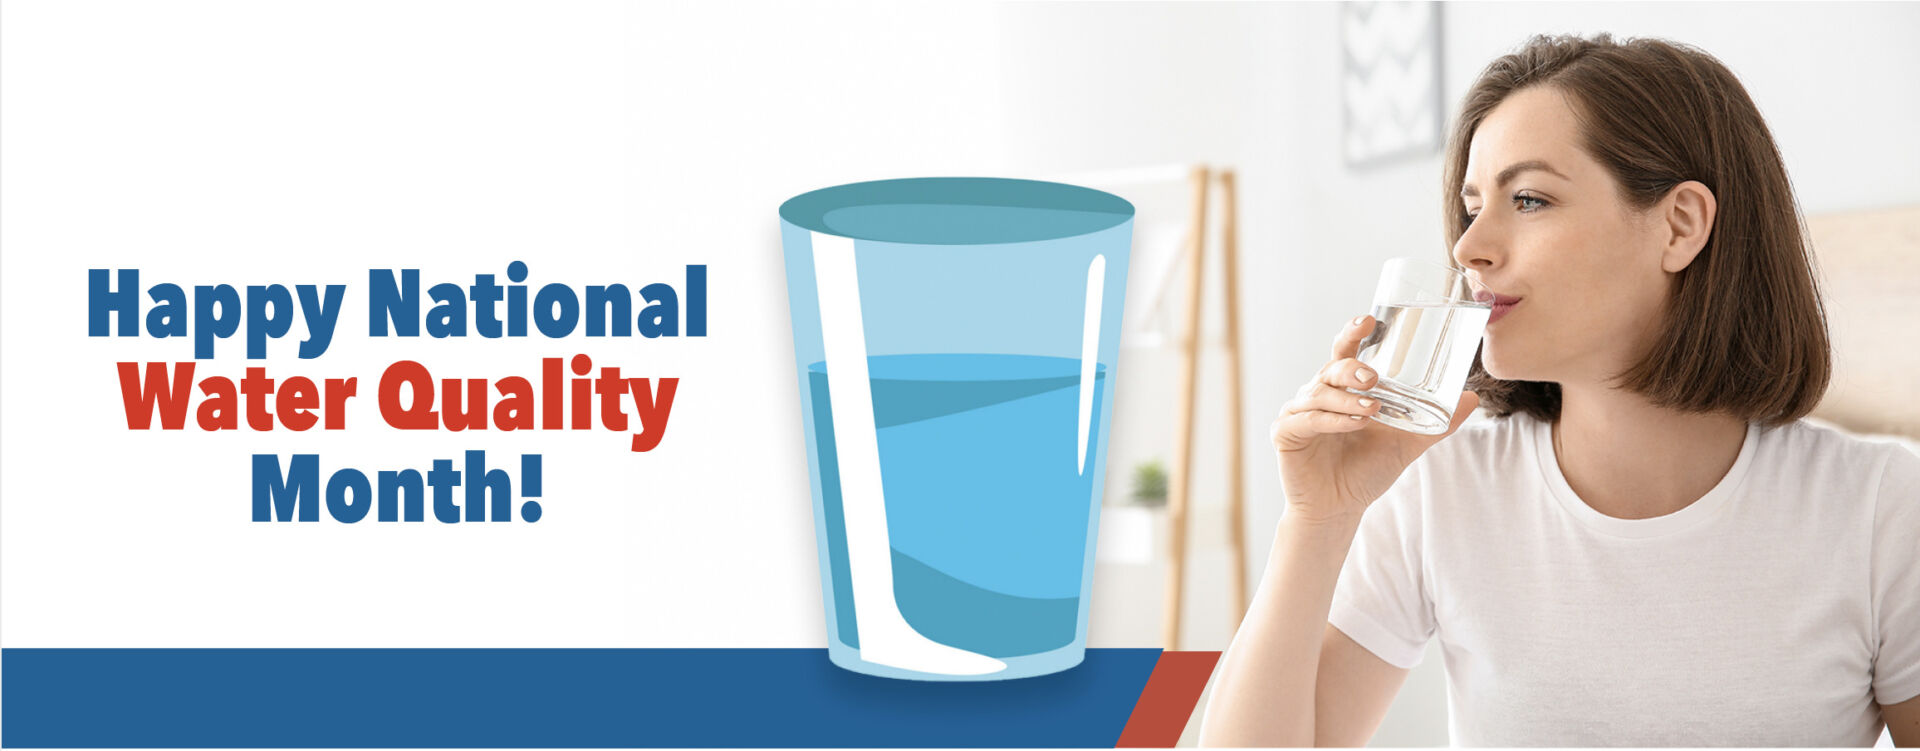 Happy National Water Quality Month!